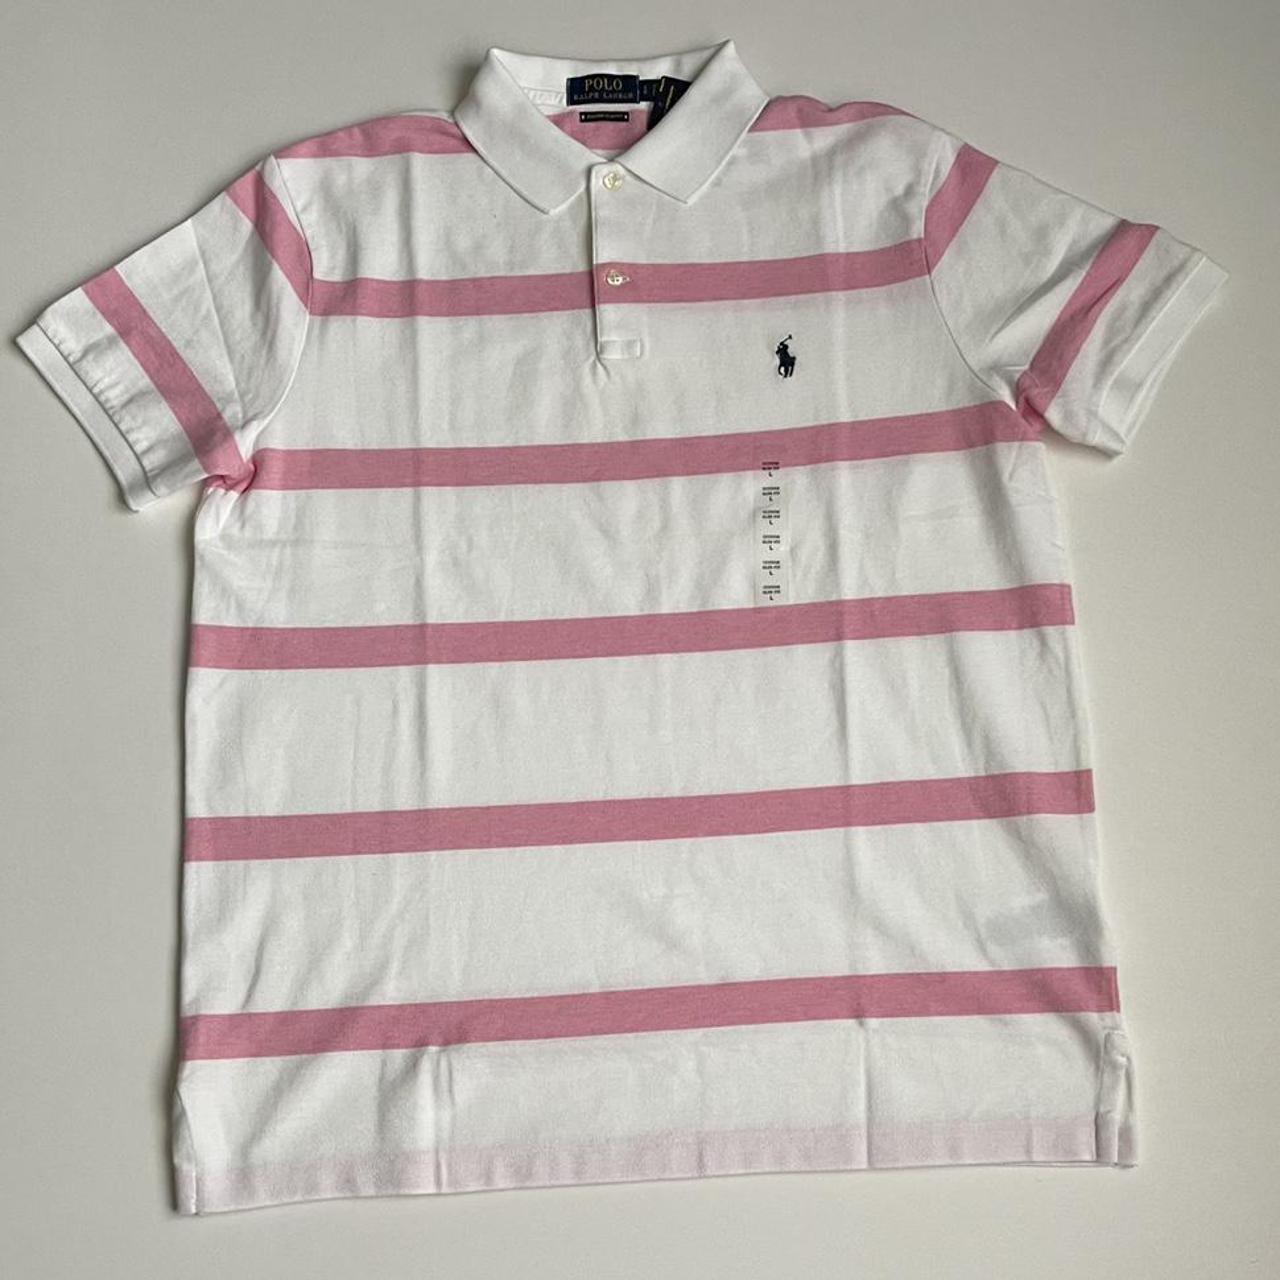 Authentic. Polo Ralph Lauren men’s pink and white... - Depop